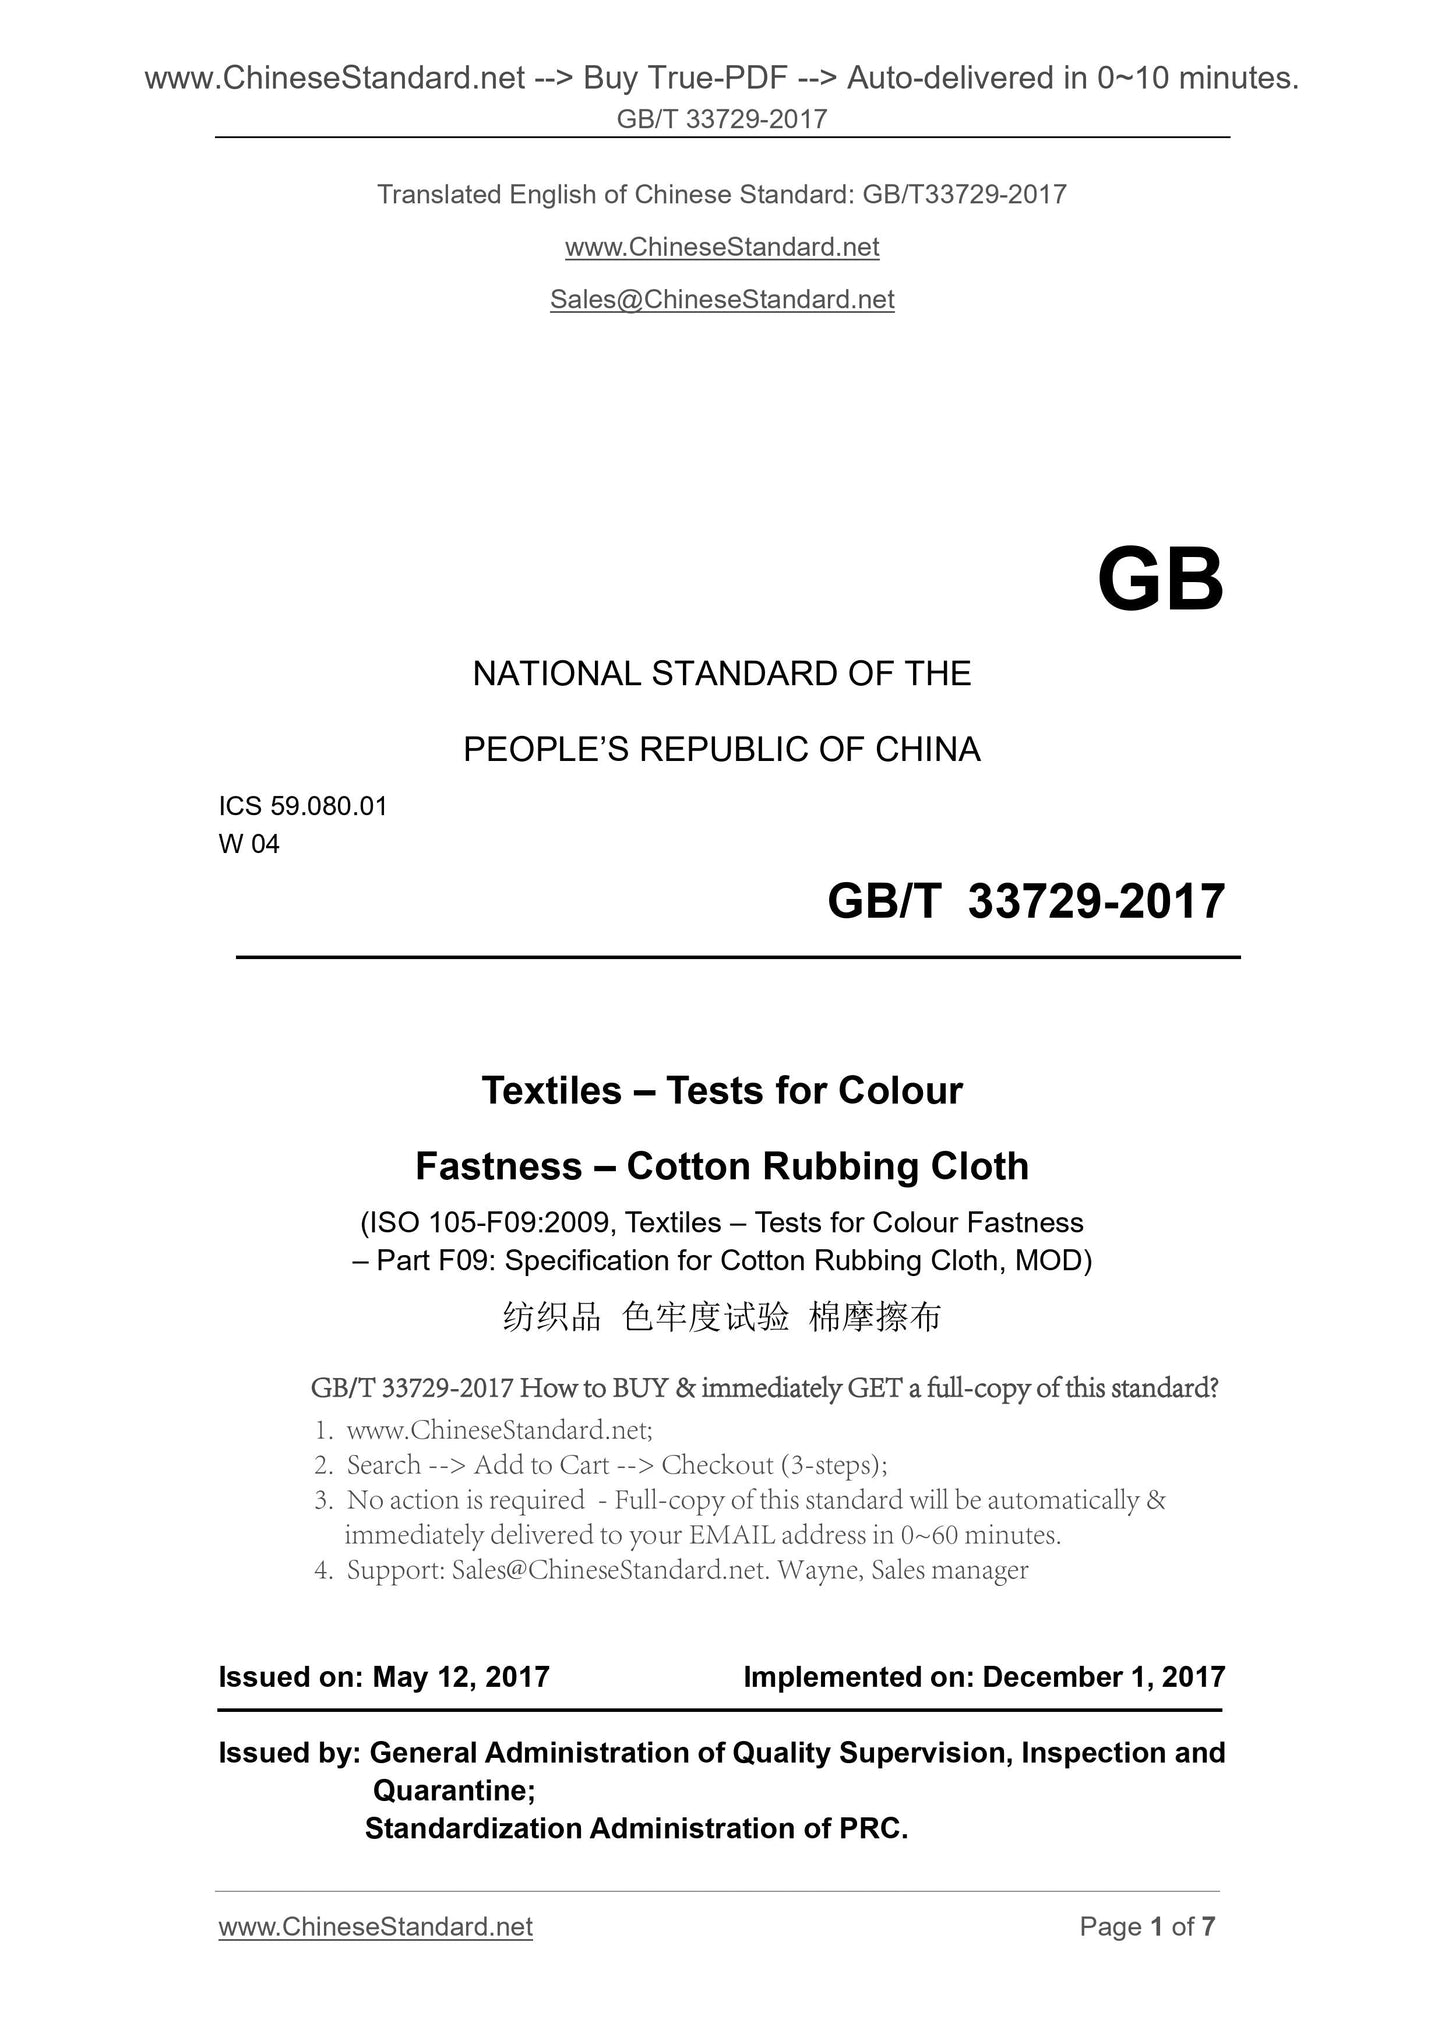 GB/T 33729-2017 Page 1